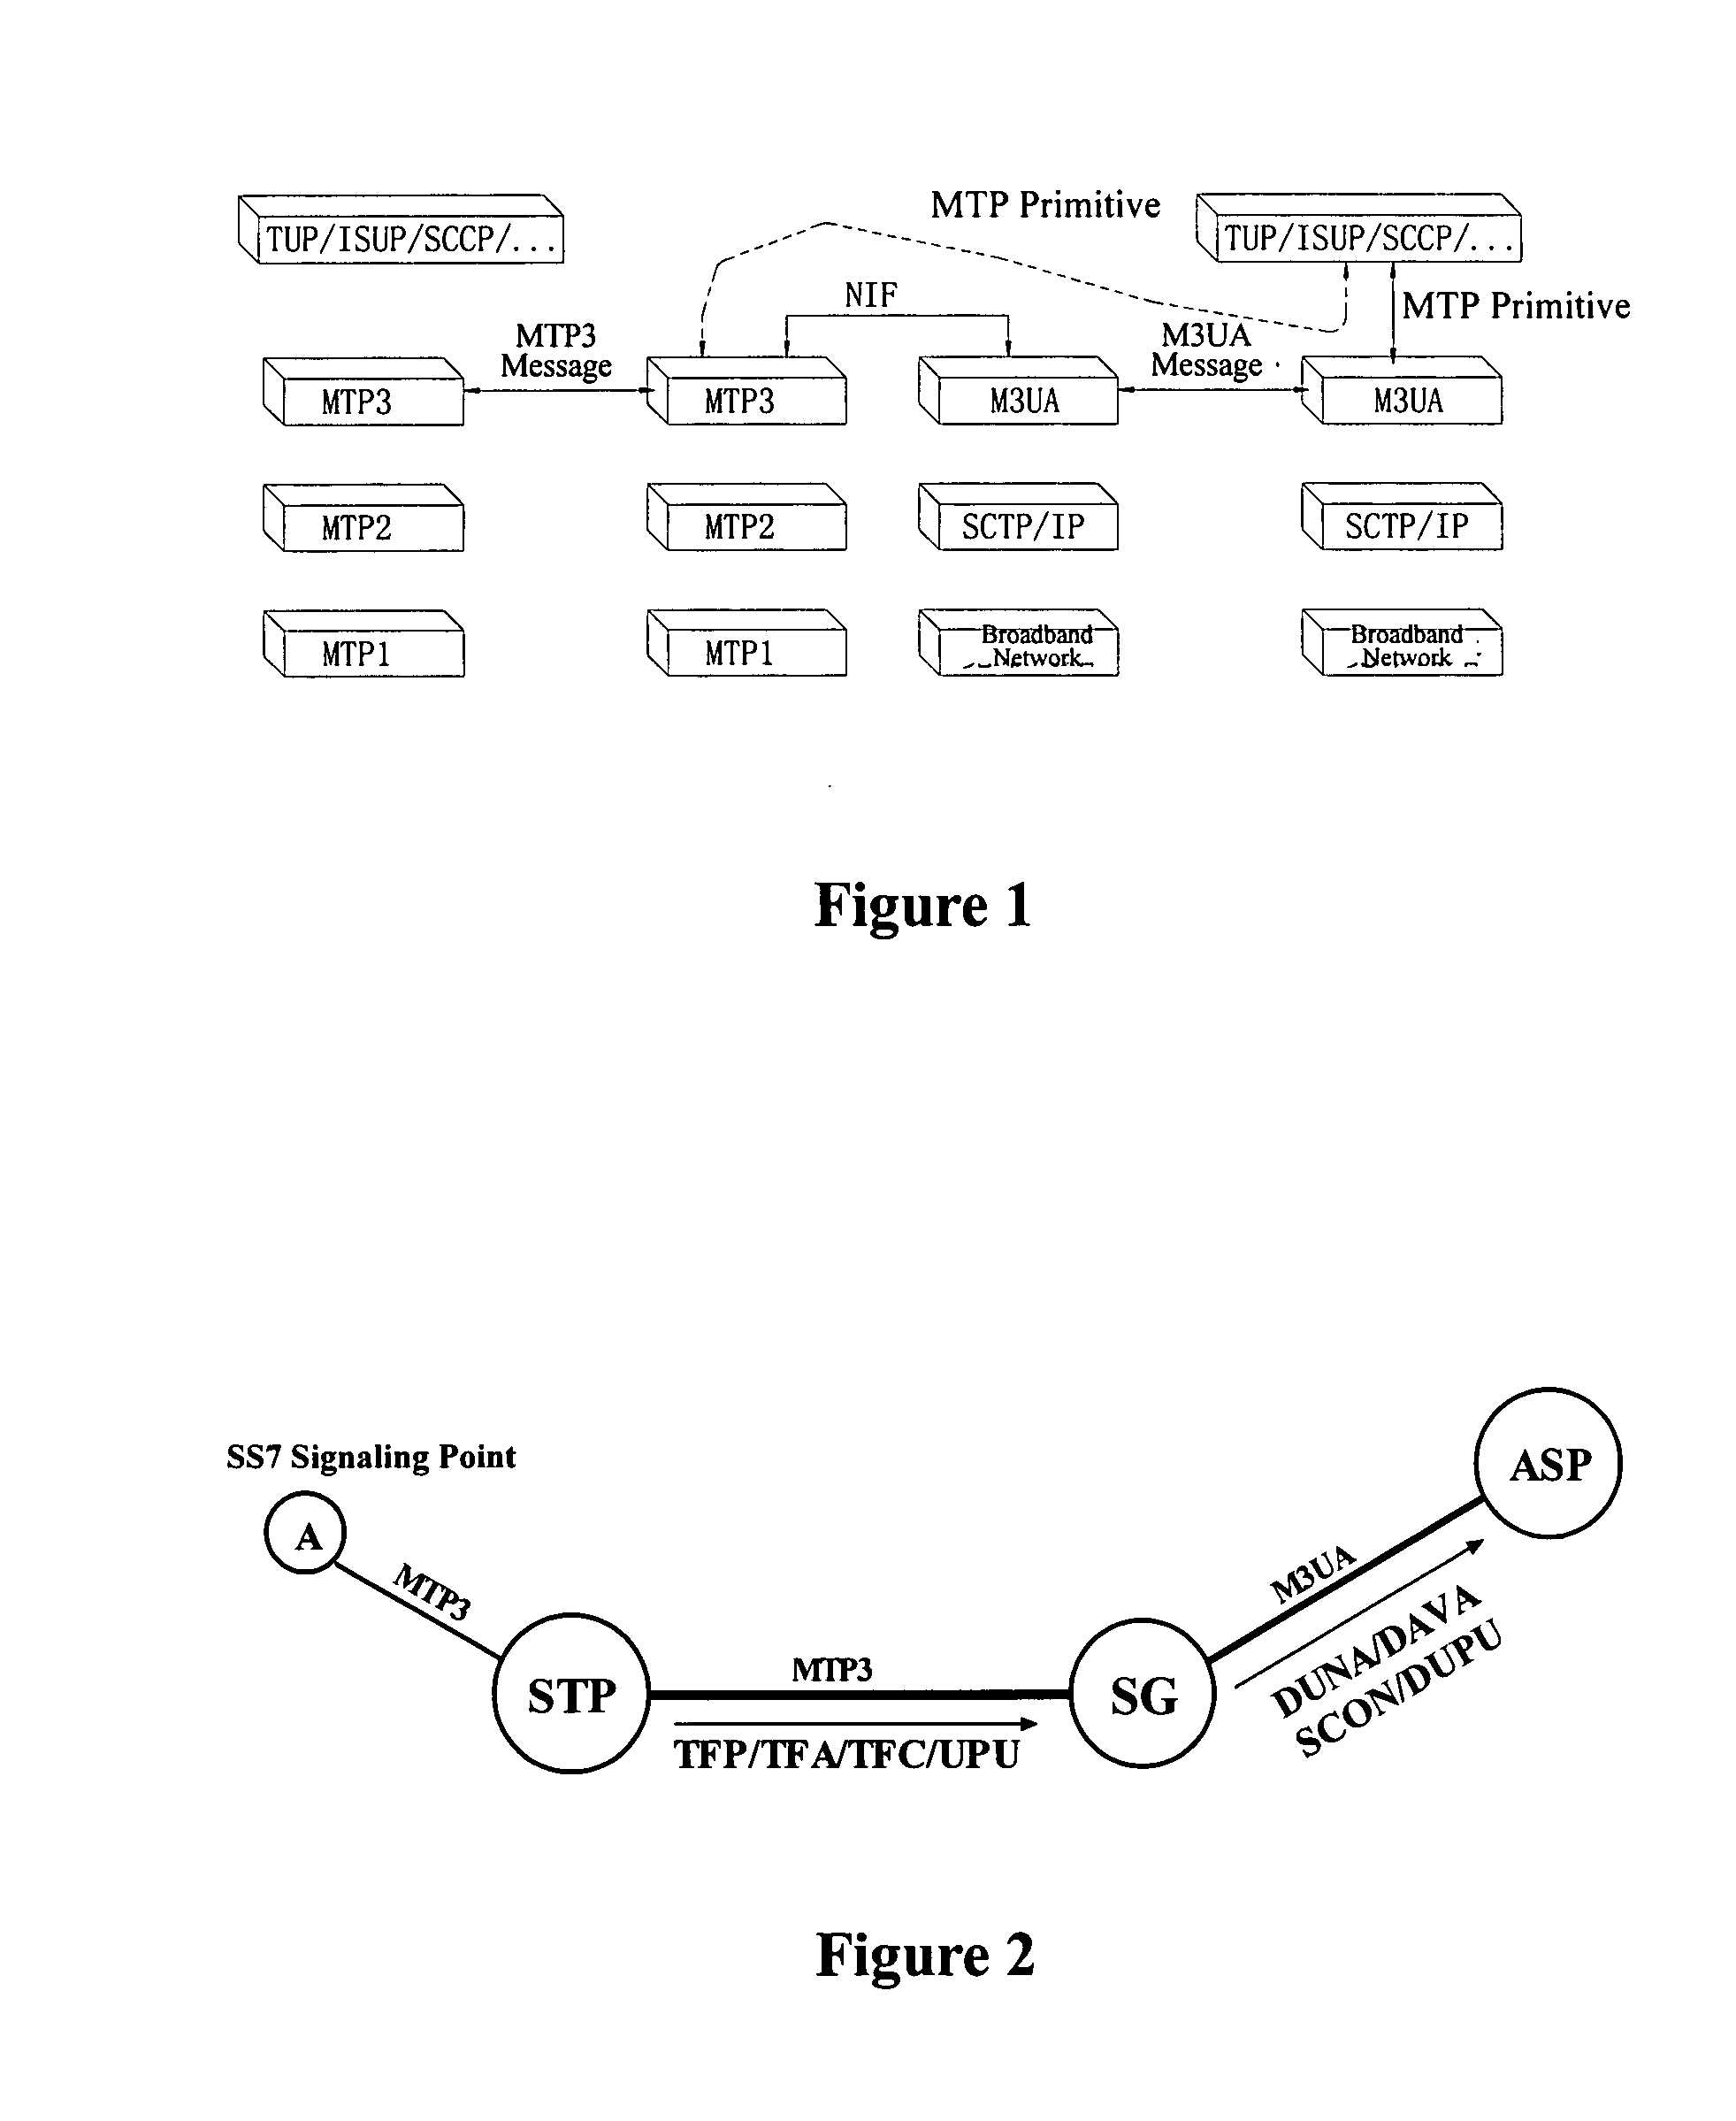 Method for reducing service loss in interworking between SS7 signaling network and M3UA, and a signaling gateway